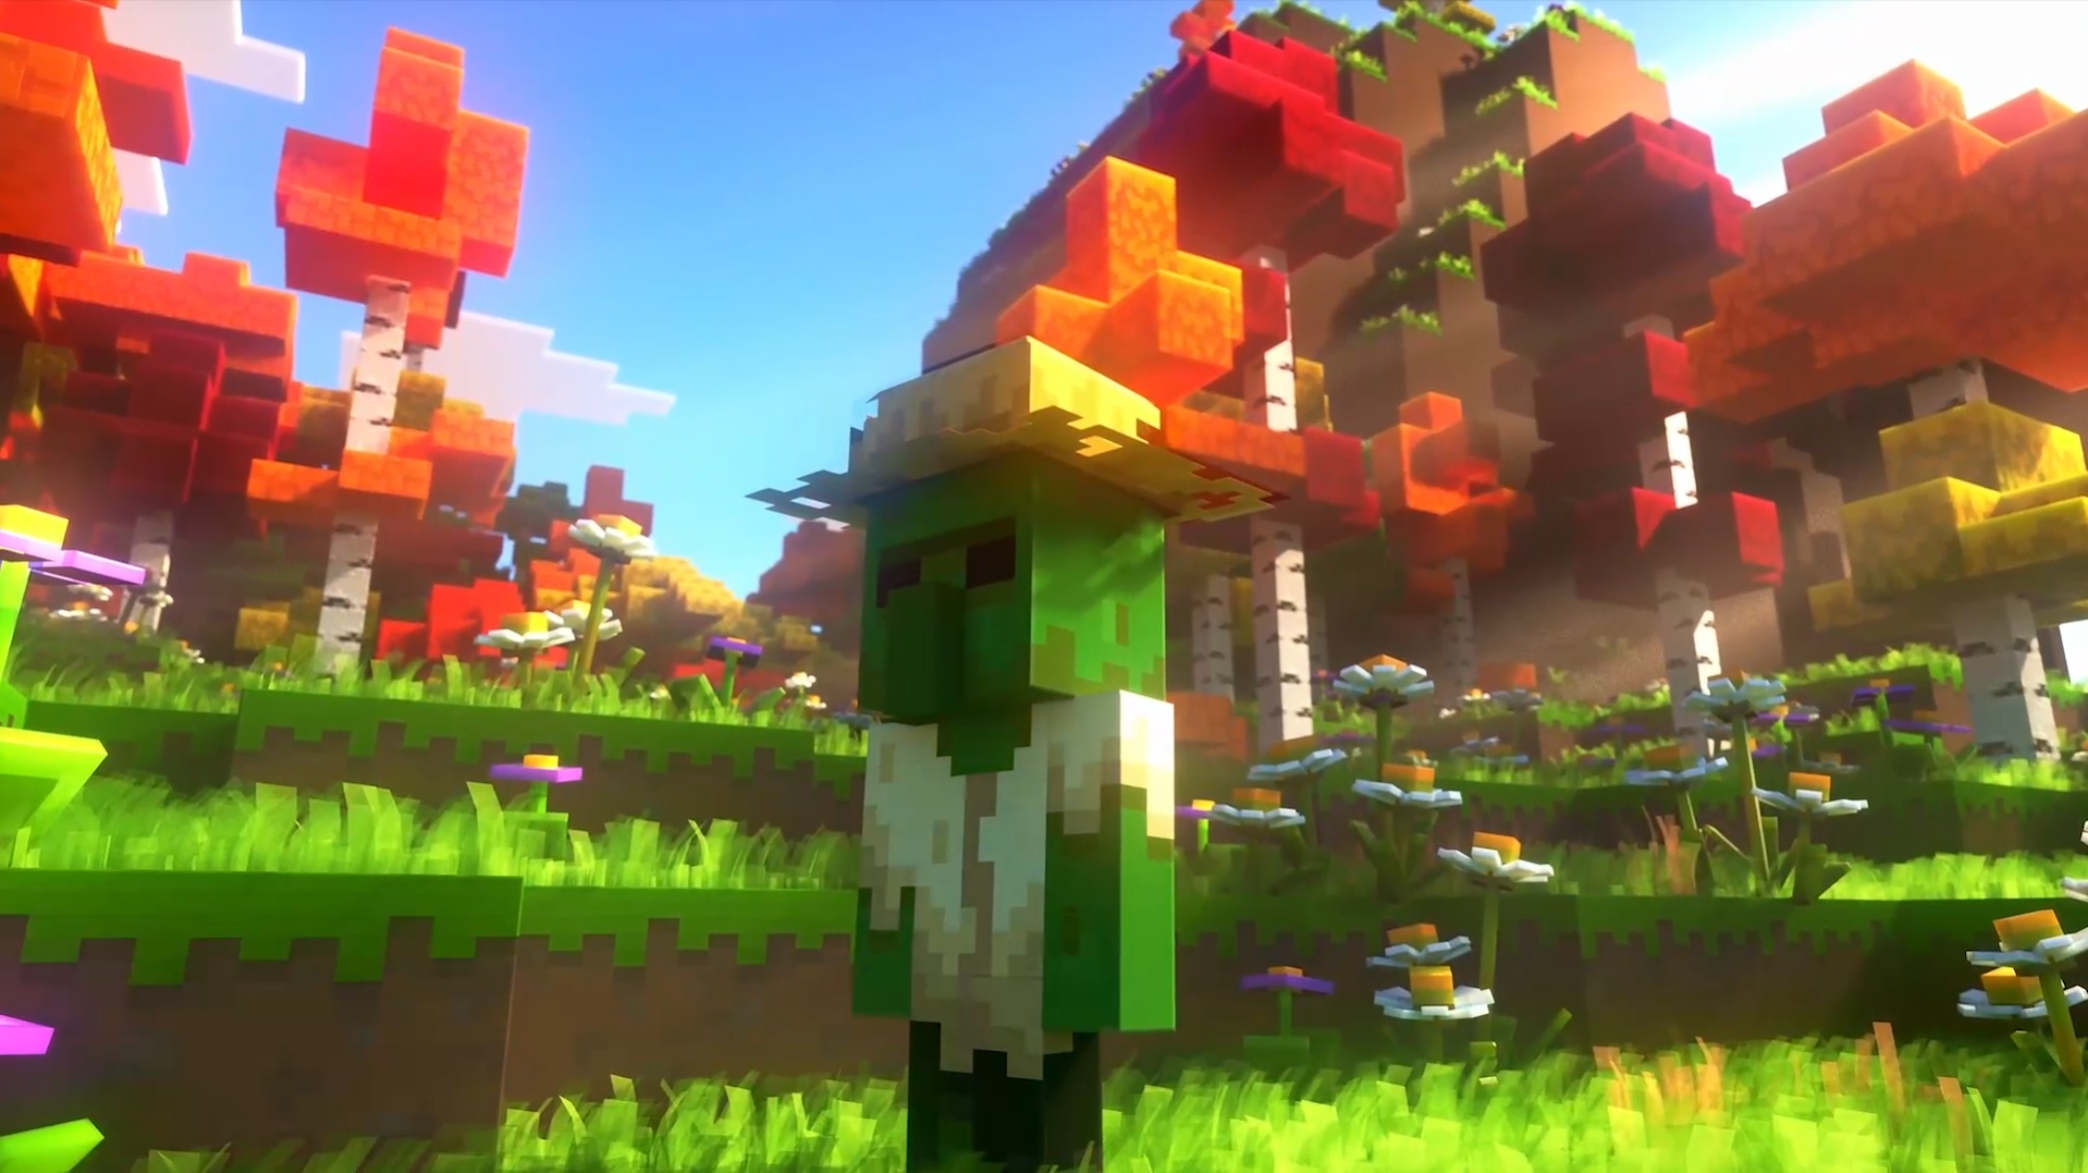 Minecraft Legends: Mojang's action-strategy spin-off will launch in 2023